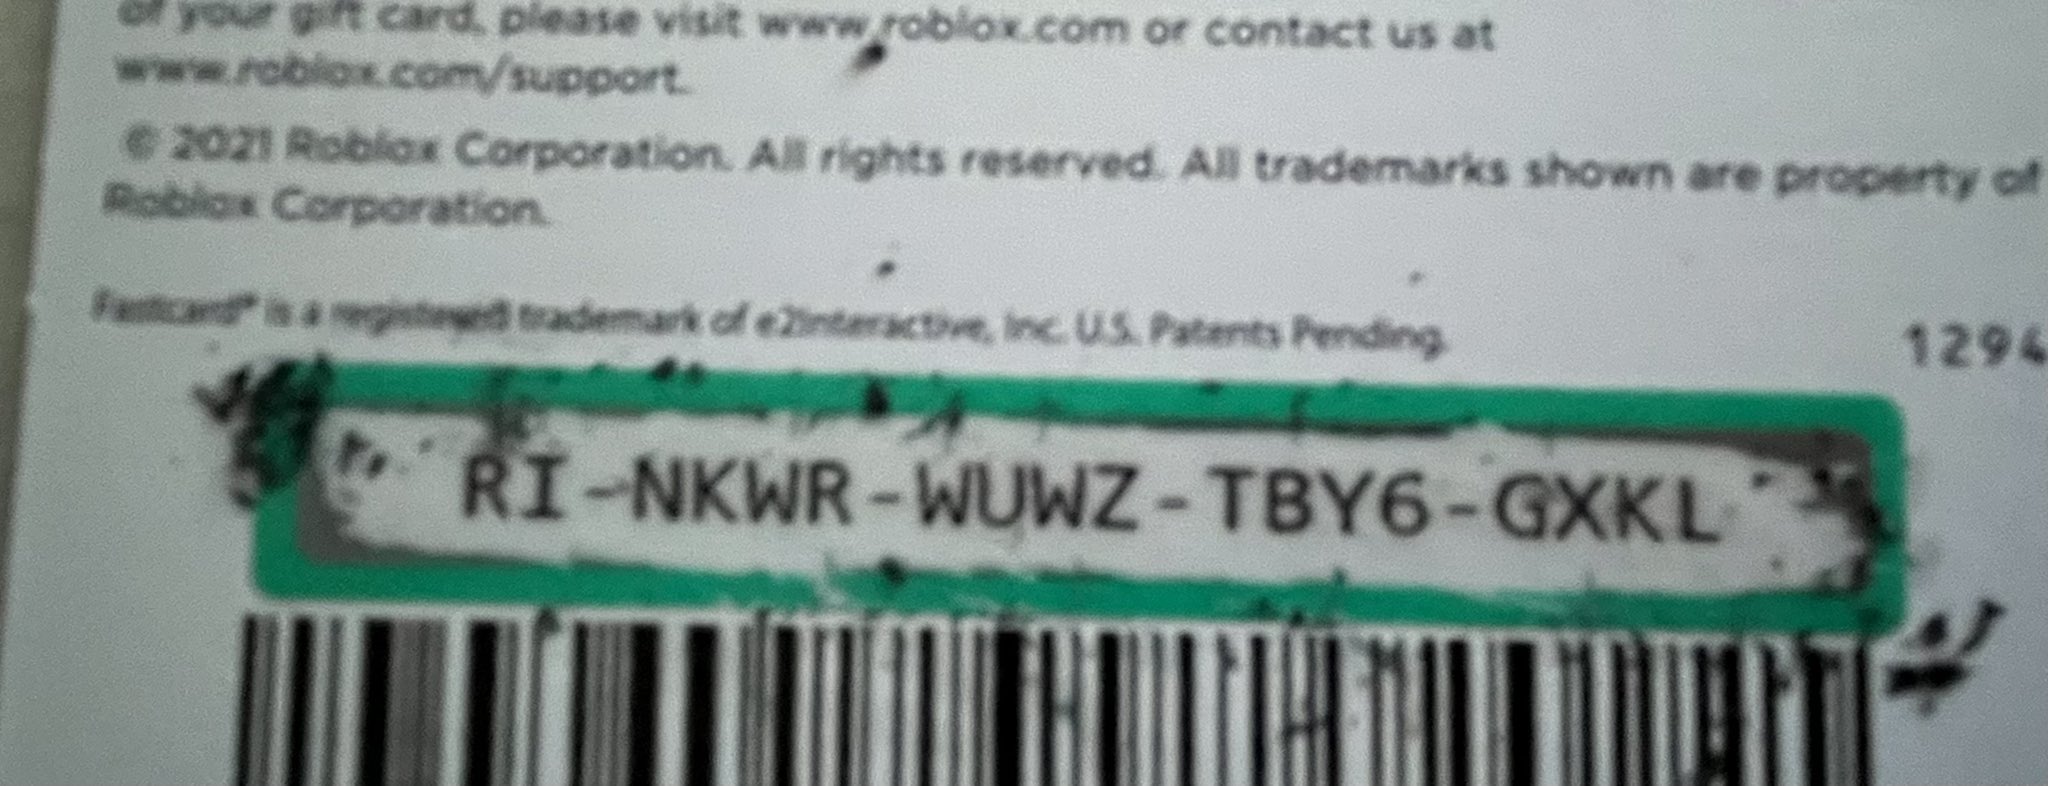 RuinedHavoc on X: $10 giftcard! Code: RI-NKWR-WUWZ-TBY6-GXKL Good luck to  whoever gets it! Follow for more code giveaways! #robuxgiveaway  #robuxgiftcard #Roblox #robux  / X